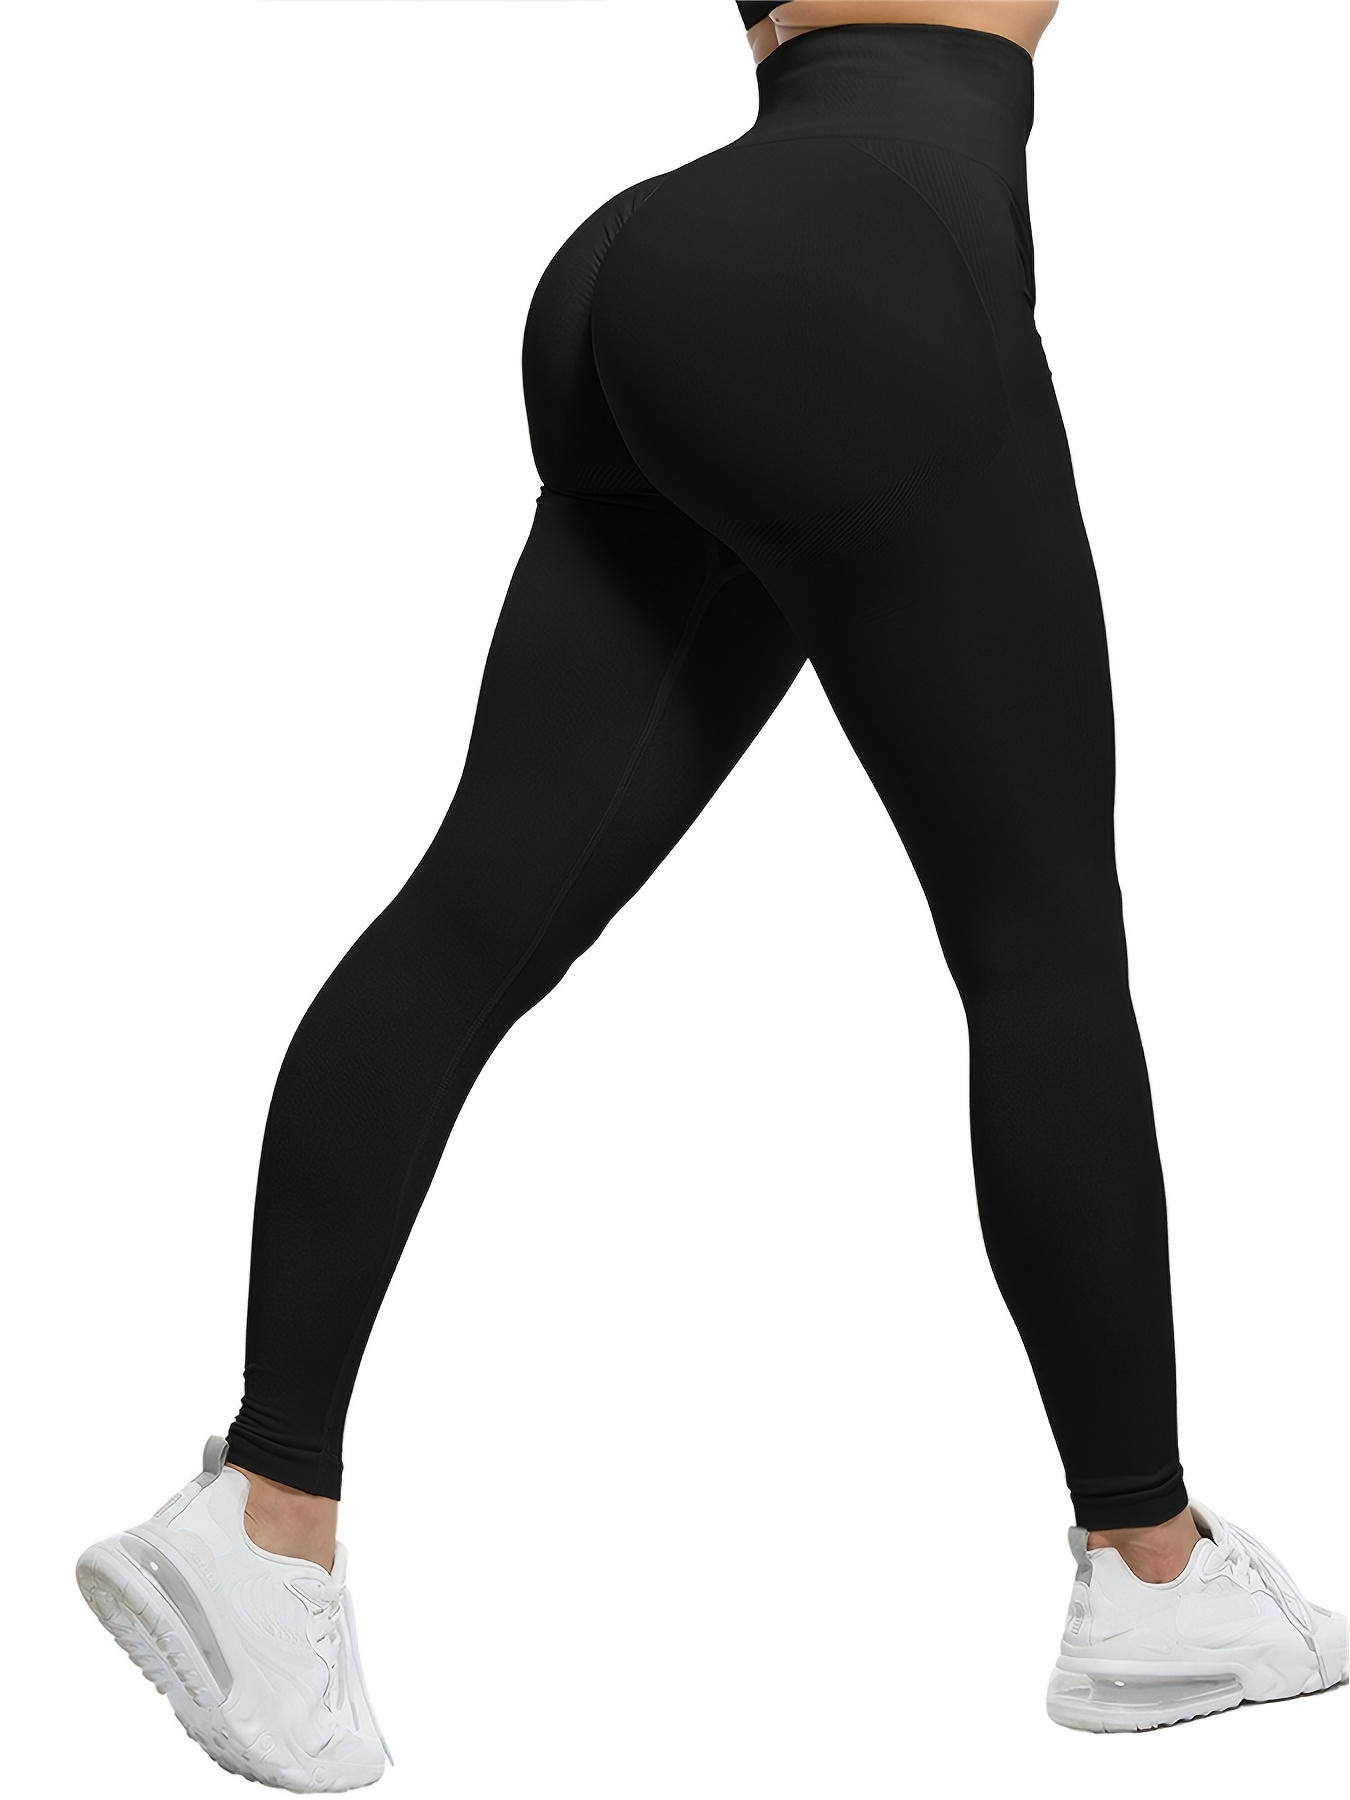 Solid Skinny Leggings, Casual High Waist Stretchy Workout Leggings, Women's  Clothing